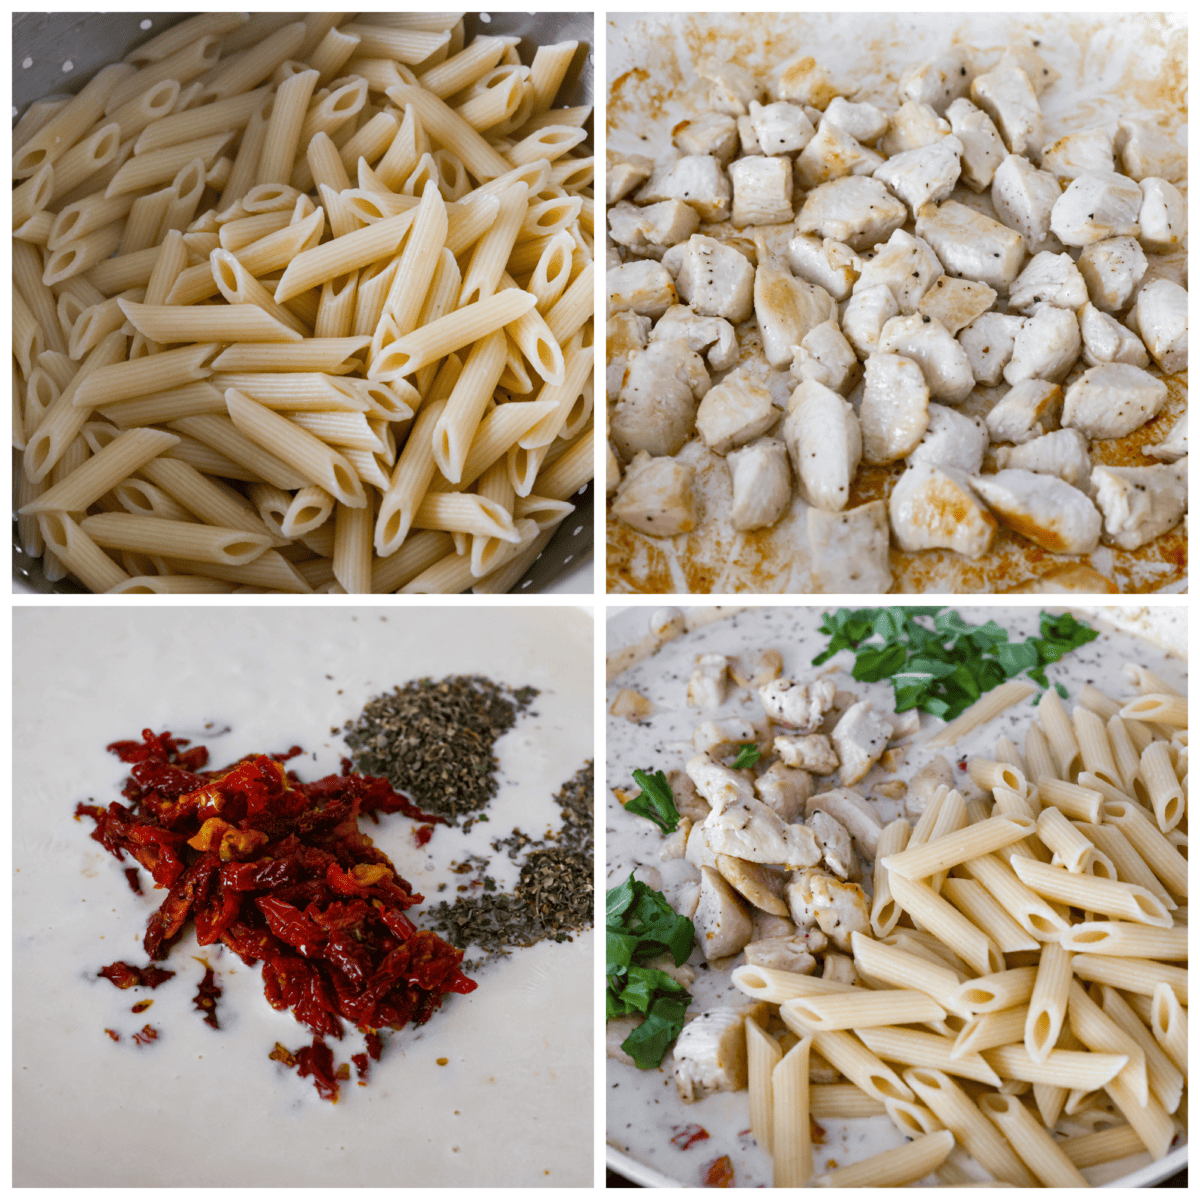 4-photo collage of the pasta, chicken, and sauce being prepared.